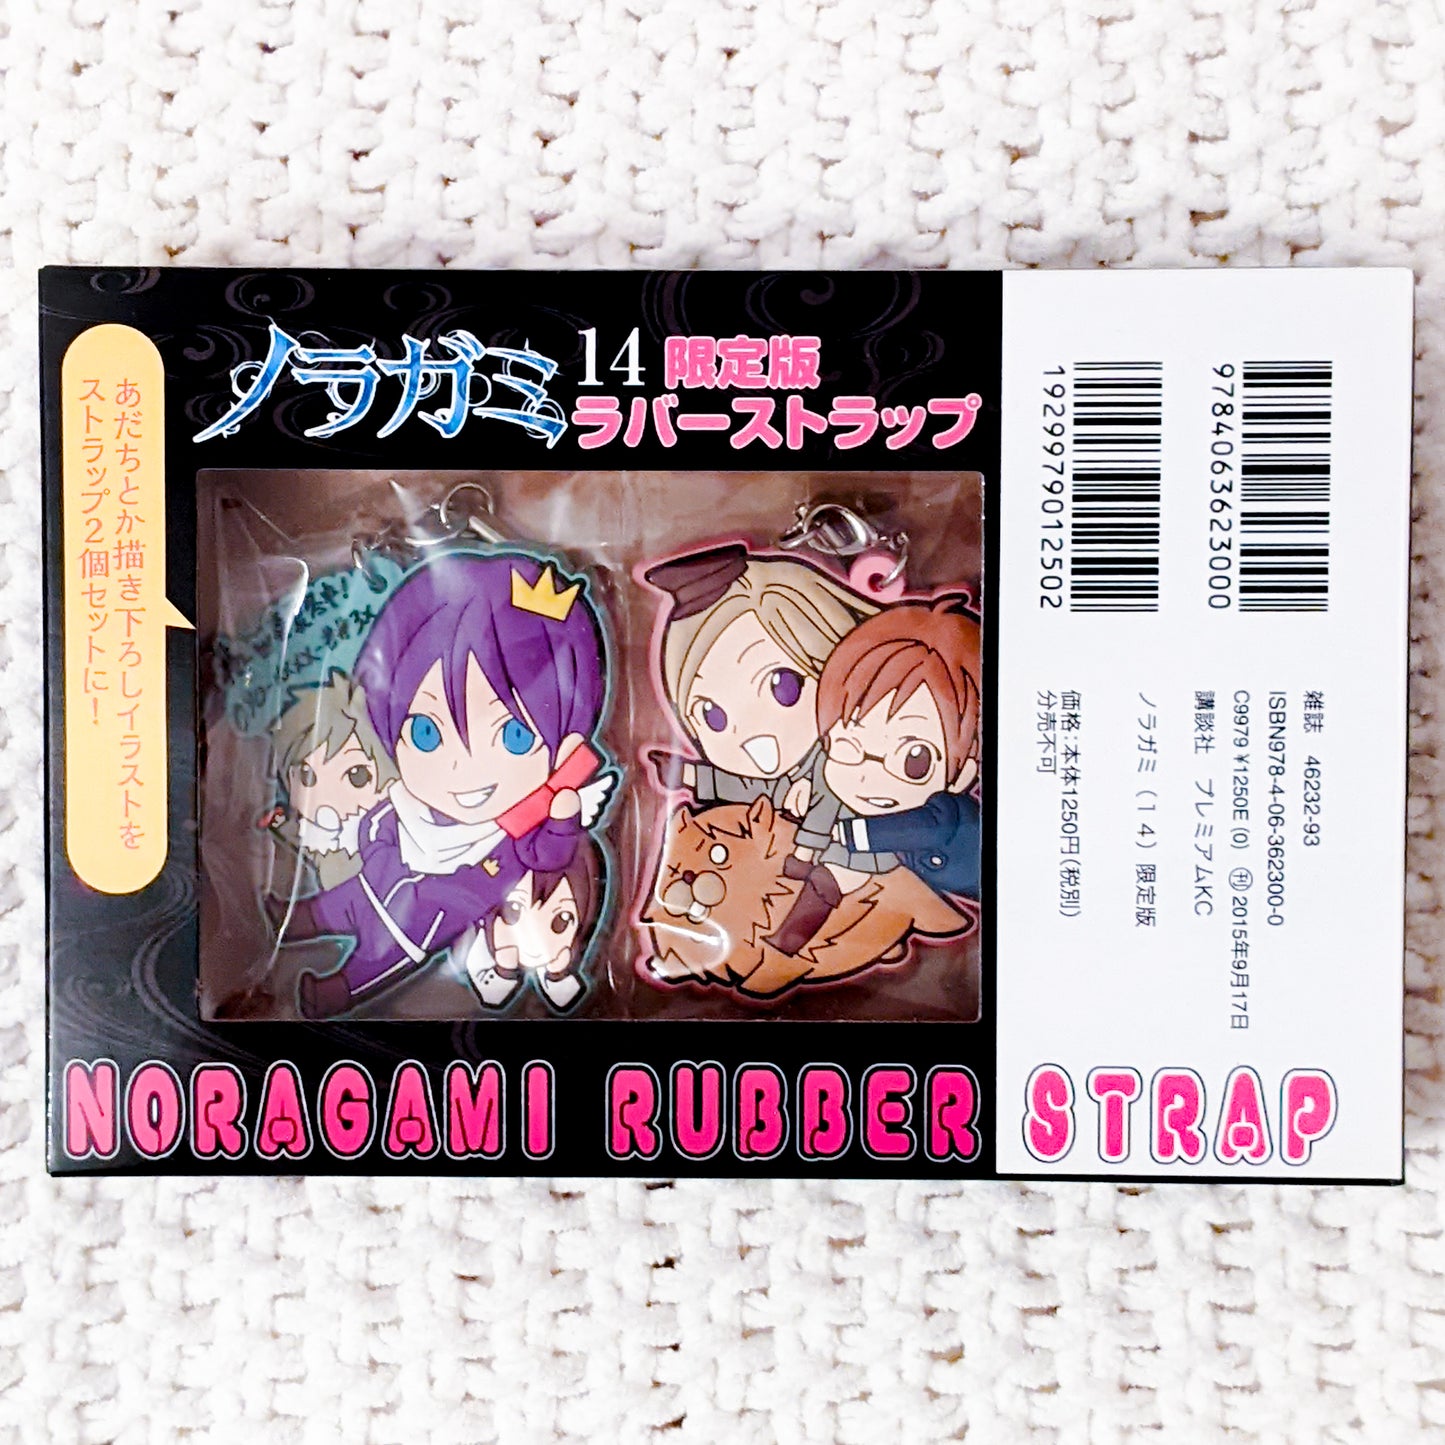 Noragami Limited Edition Anime Keychain Rubber Strap Set